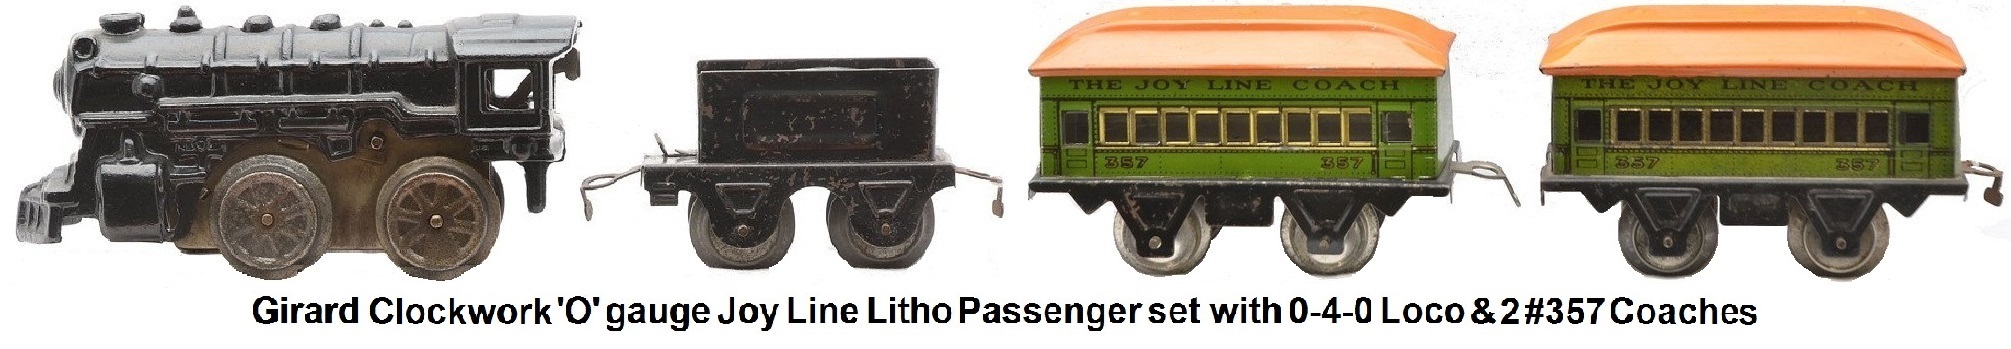 Joy Line 'O' gauge tinplate lithographed pasenger set with 0-4-0 cast loco, tender and two #357 Pullman coaches